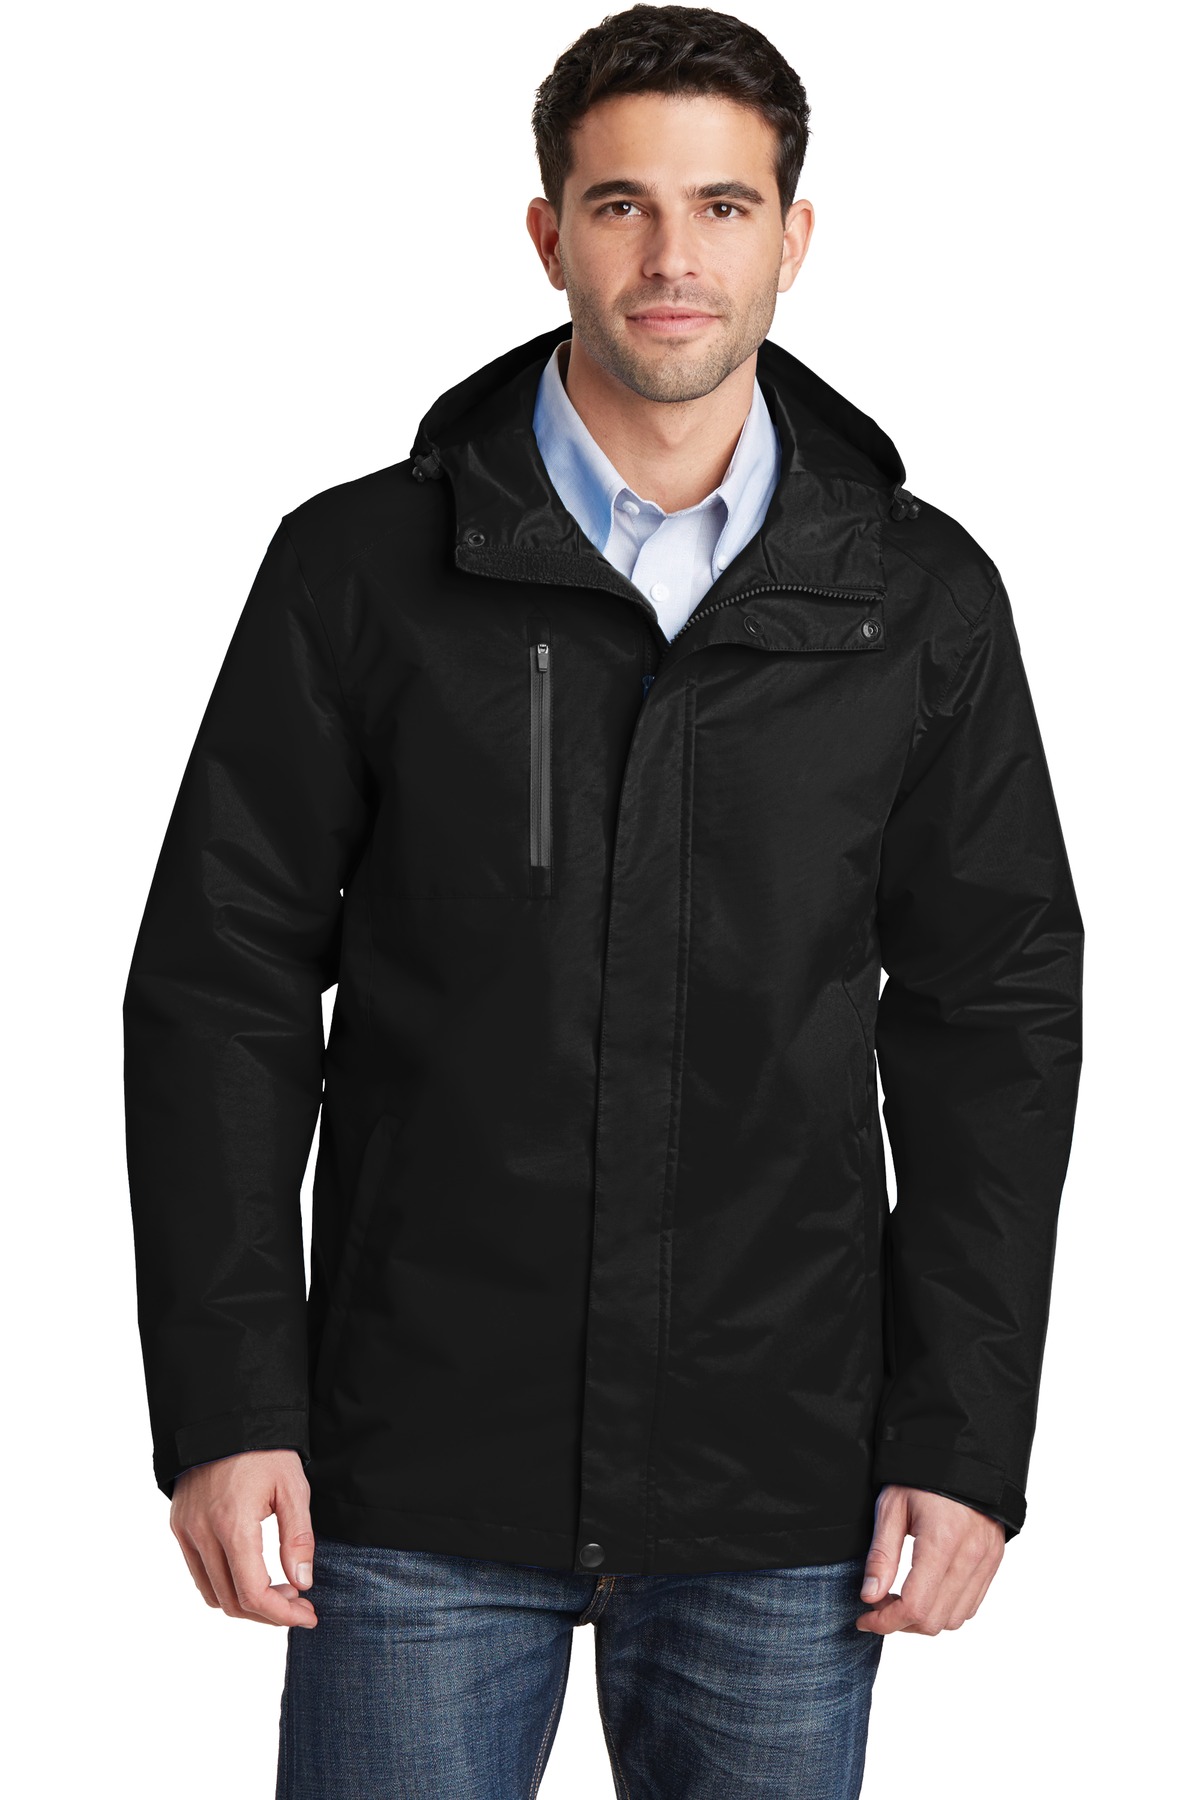 Port Authority All-Conditions Jacket-Port Authority